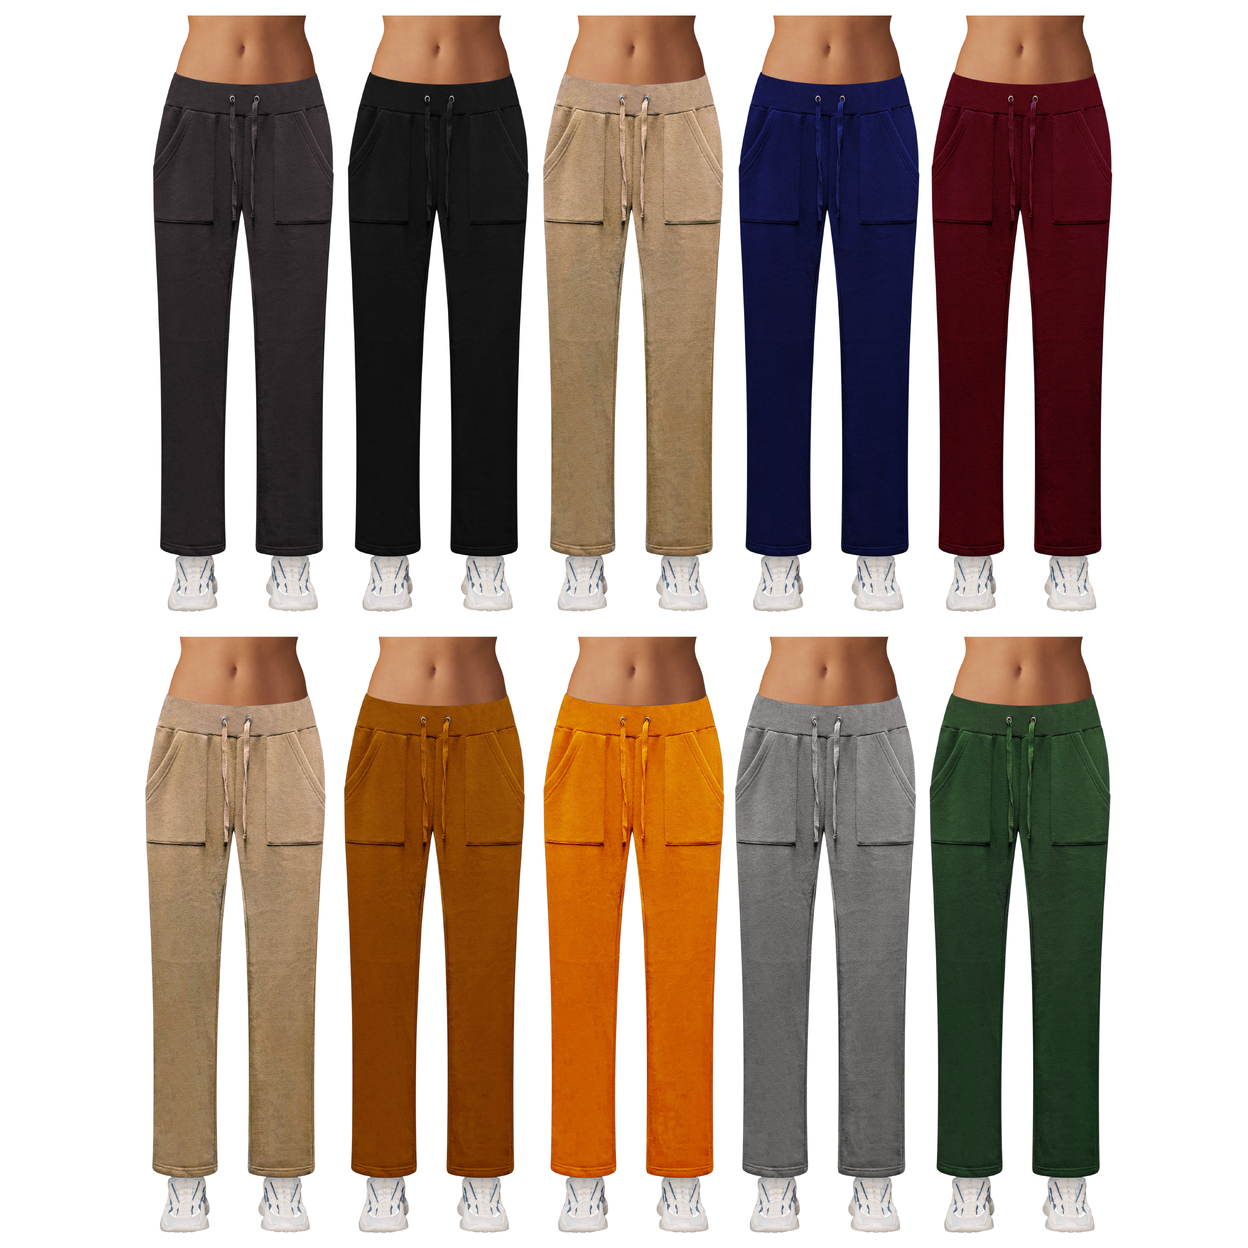 Multi-Pack: Women's Ultra-Soft Cozy Fleece Lined Elastic Waistband Terry Knit Pants - 1-Pack, Large